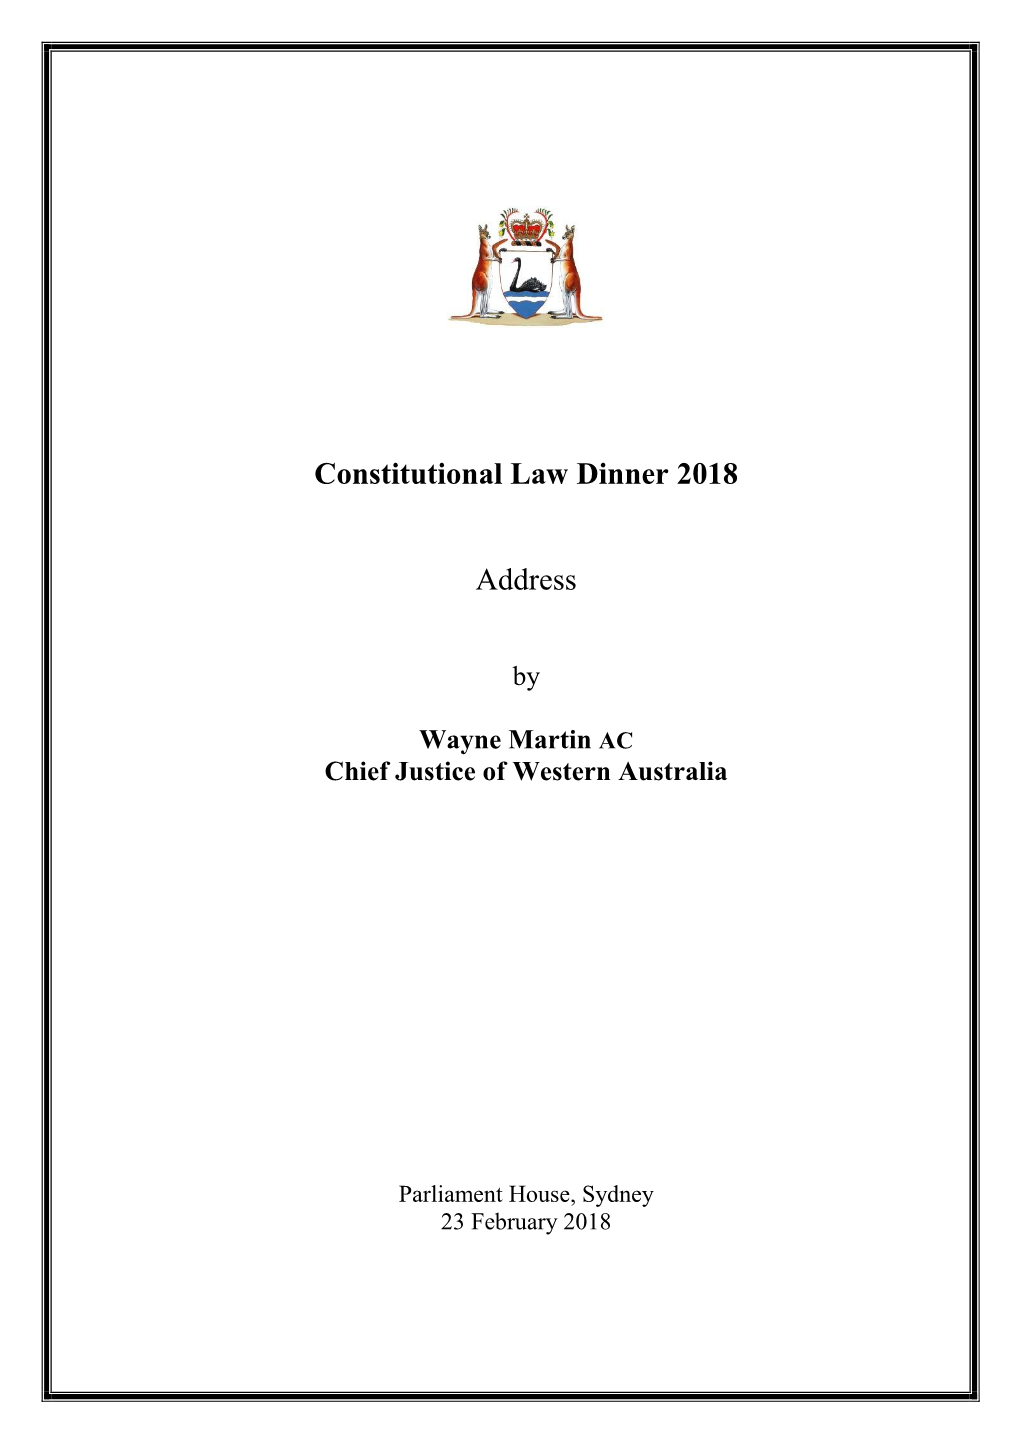 Constitutional Law Dinner 2018 By